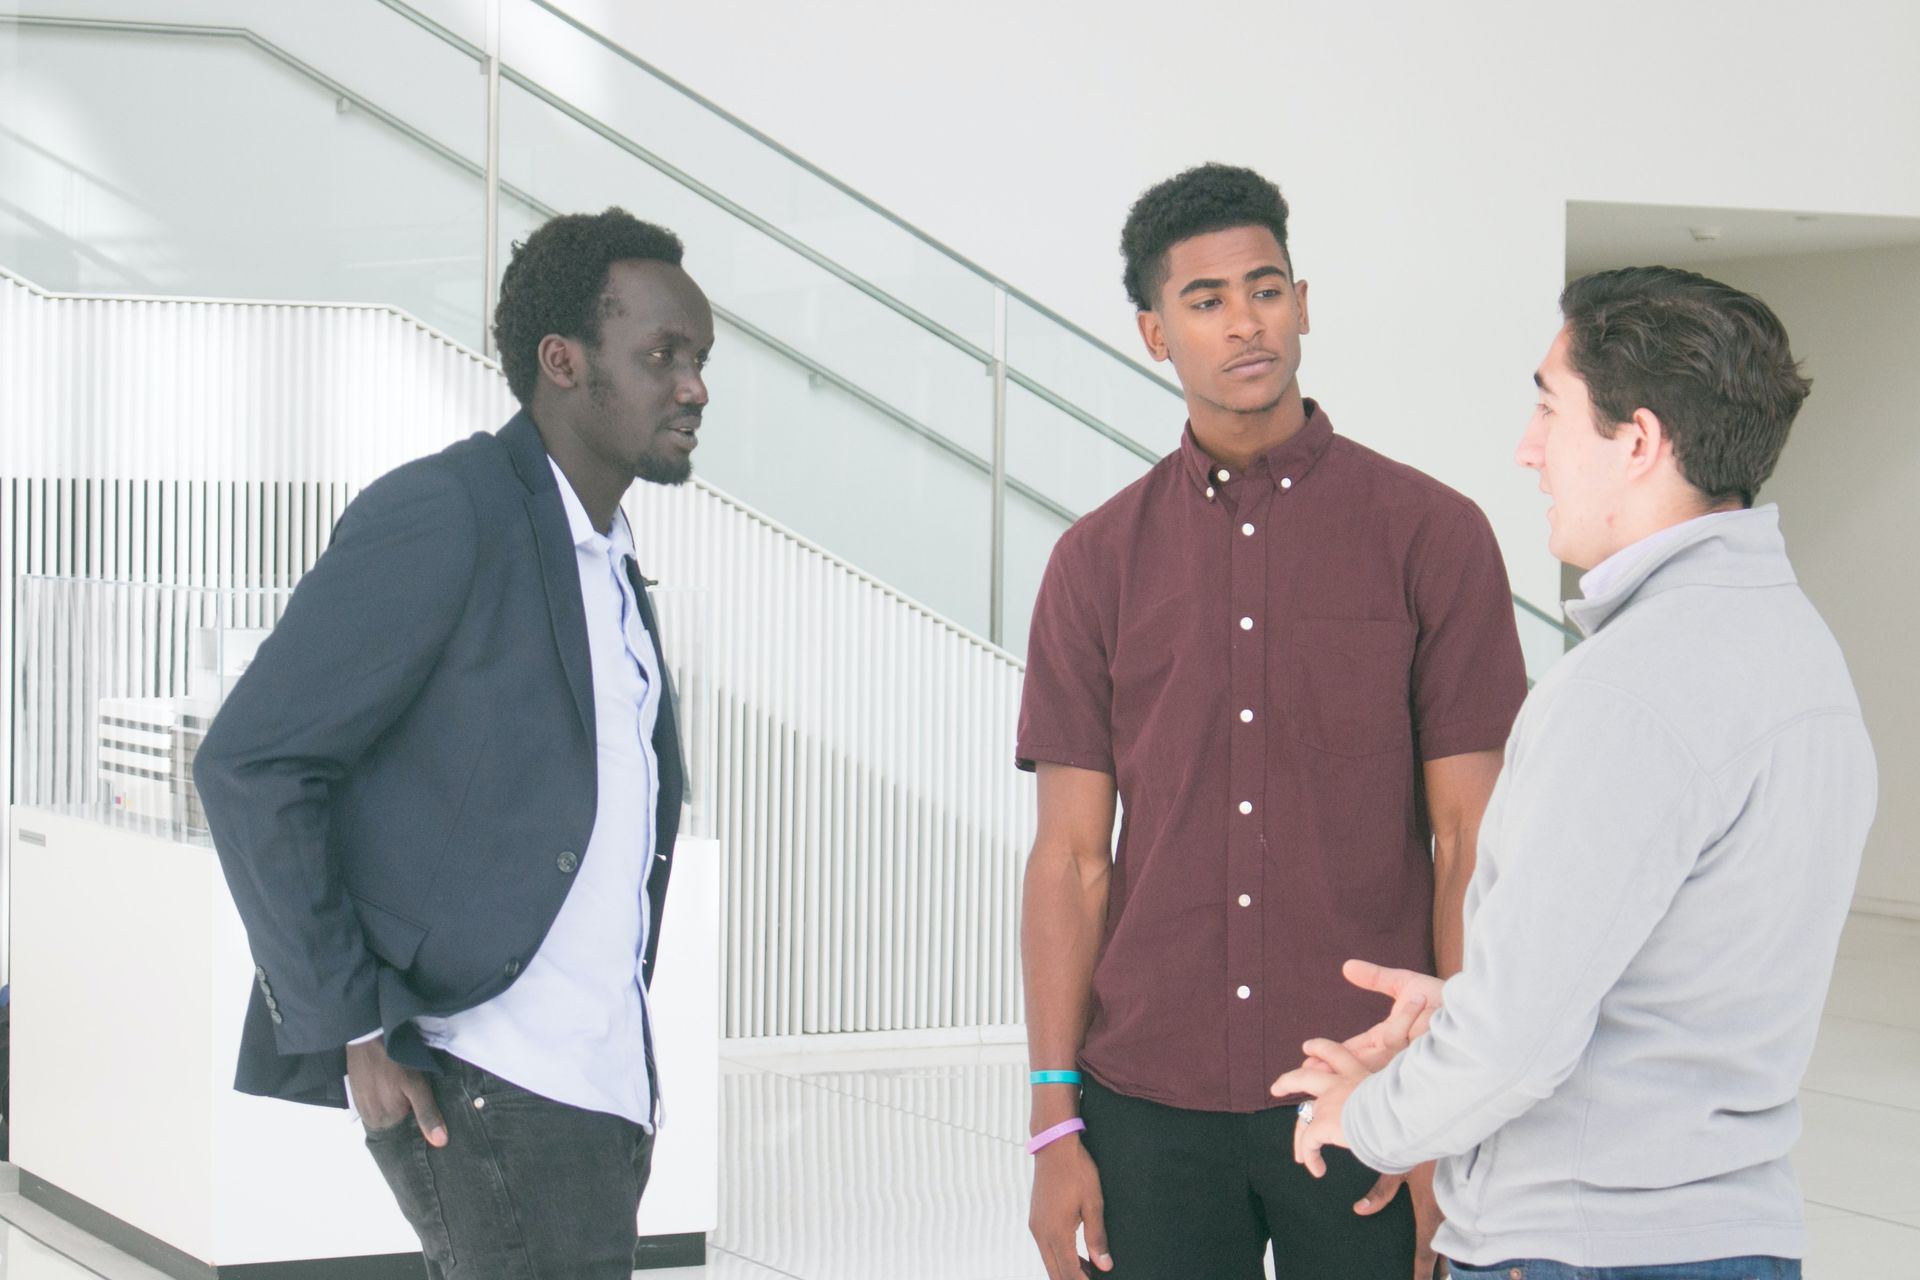 Two Black men and a white man are standing in a white stairwell conversing